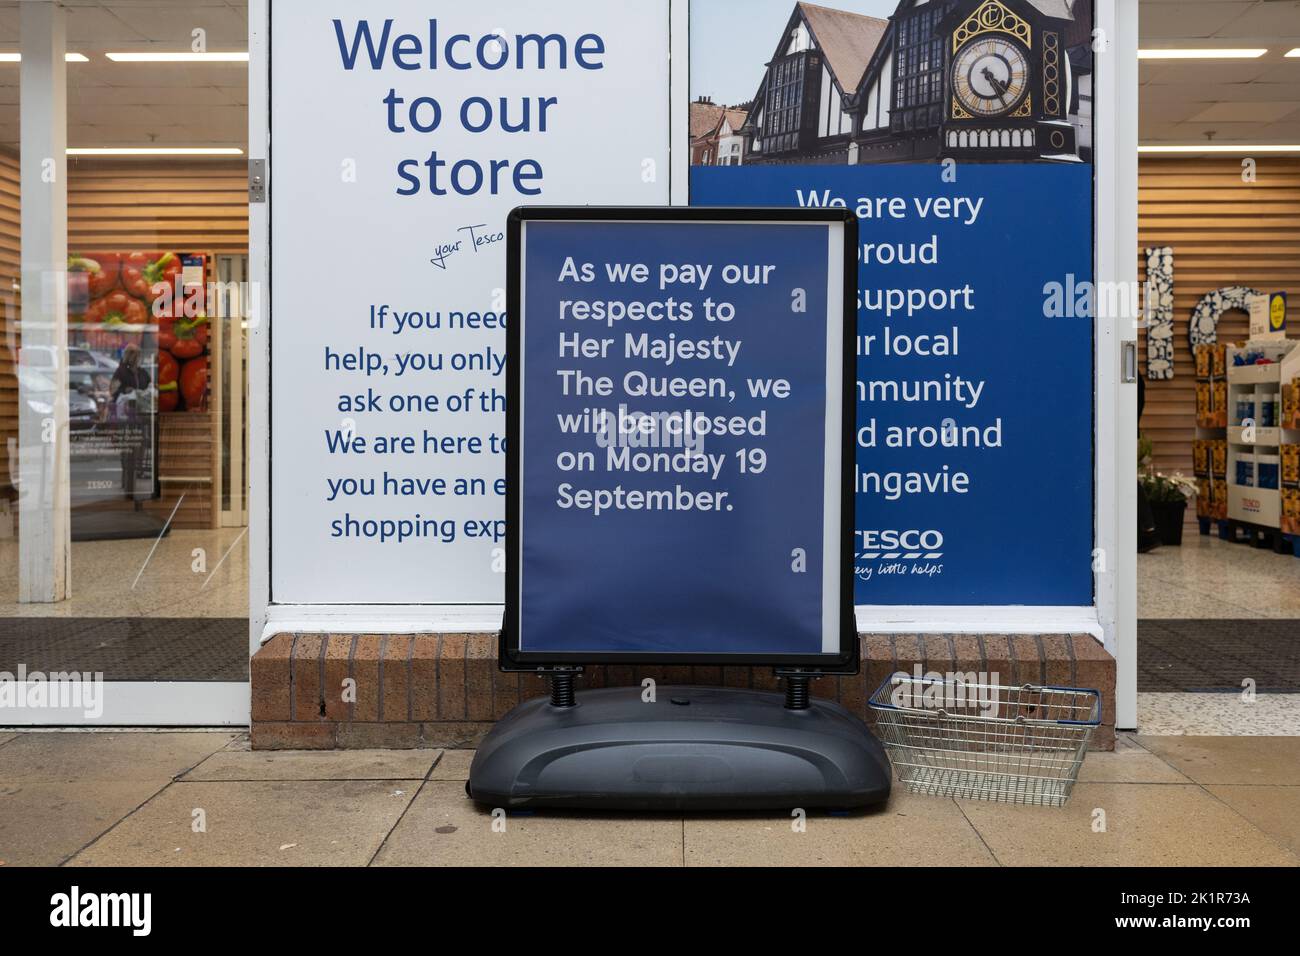 Milngavie, Scotland, UK - 18 September 2022: sign outside Tesco store in Milngavie saying 'As we pay our respects to Her Majesty The Queen, we will be Stock Photo